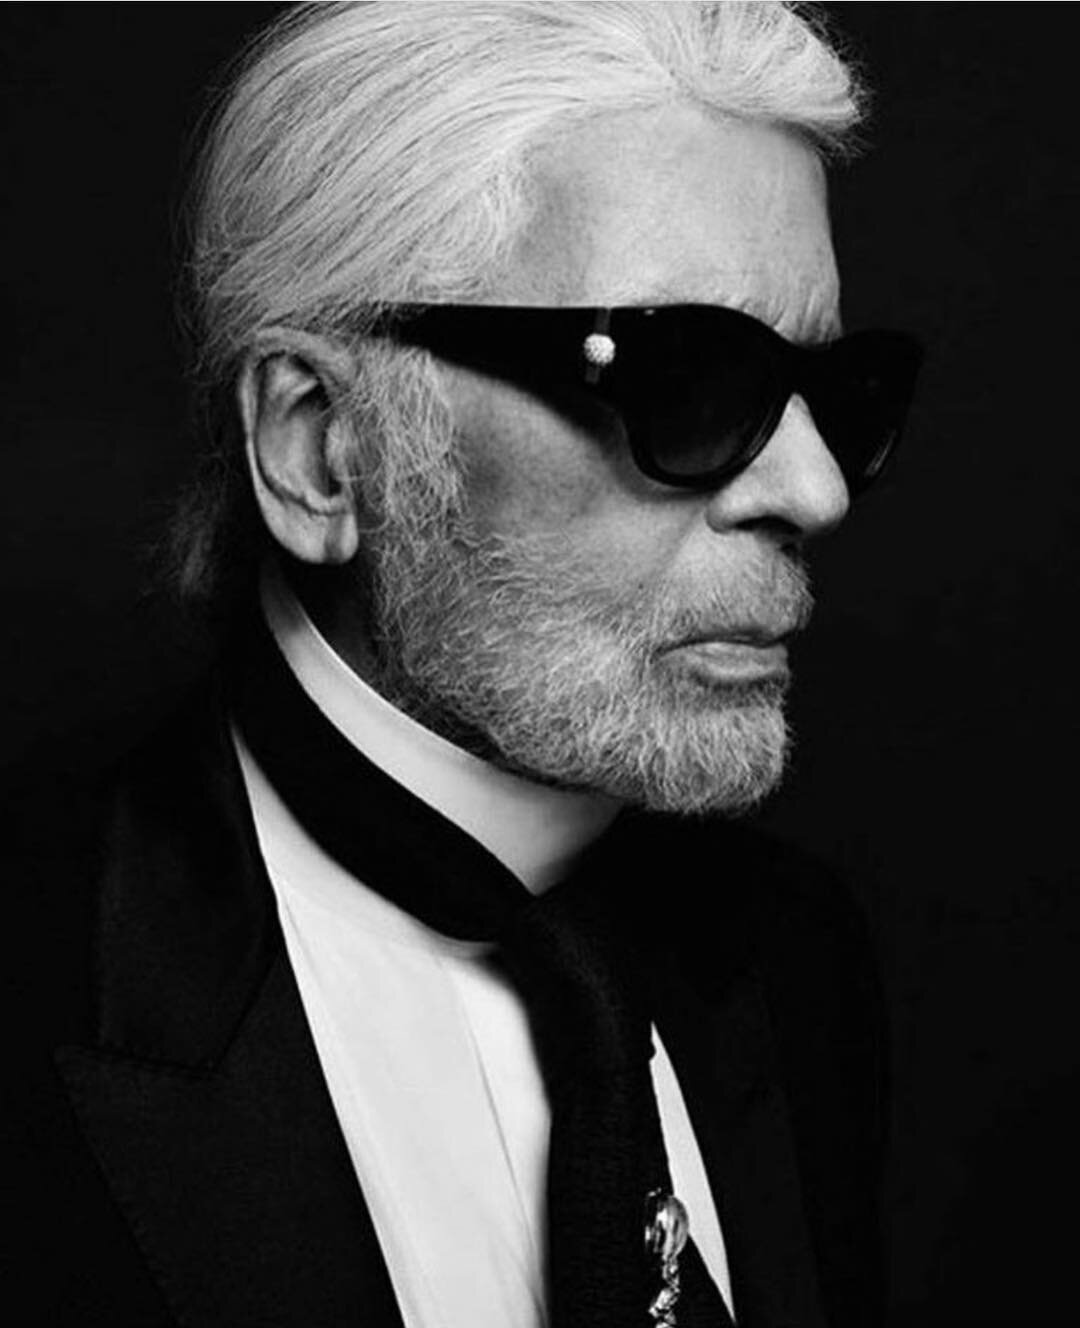 RIP: A true icon and visionary #karllagerfeld 💔